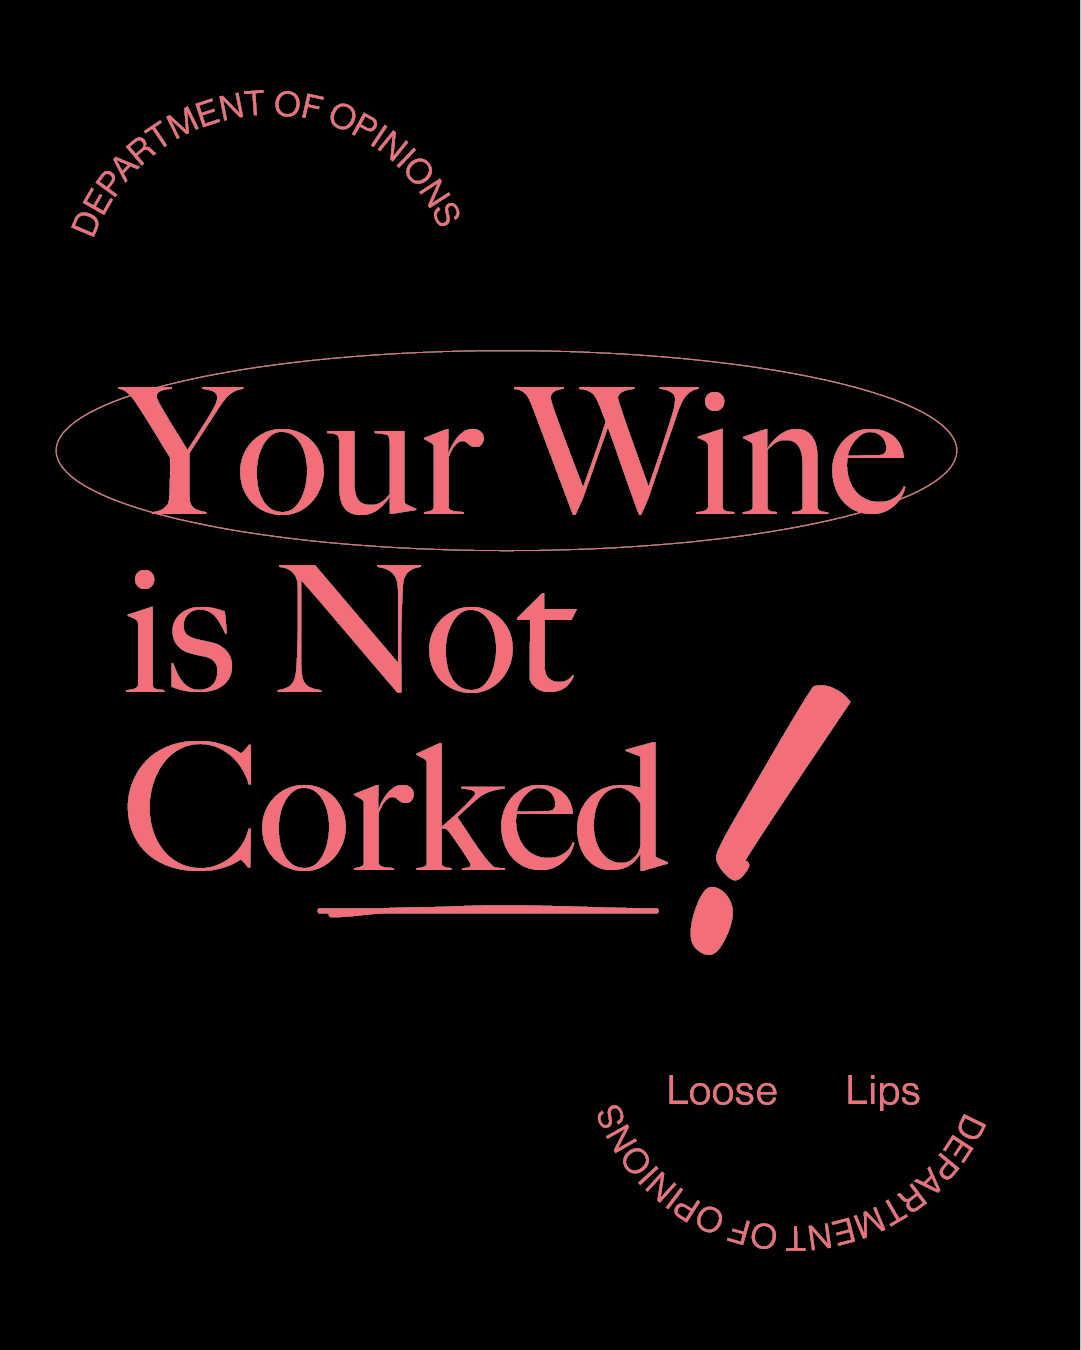 🍾 Your Wine Is Not Corked! - DRNKS